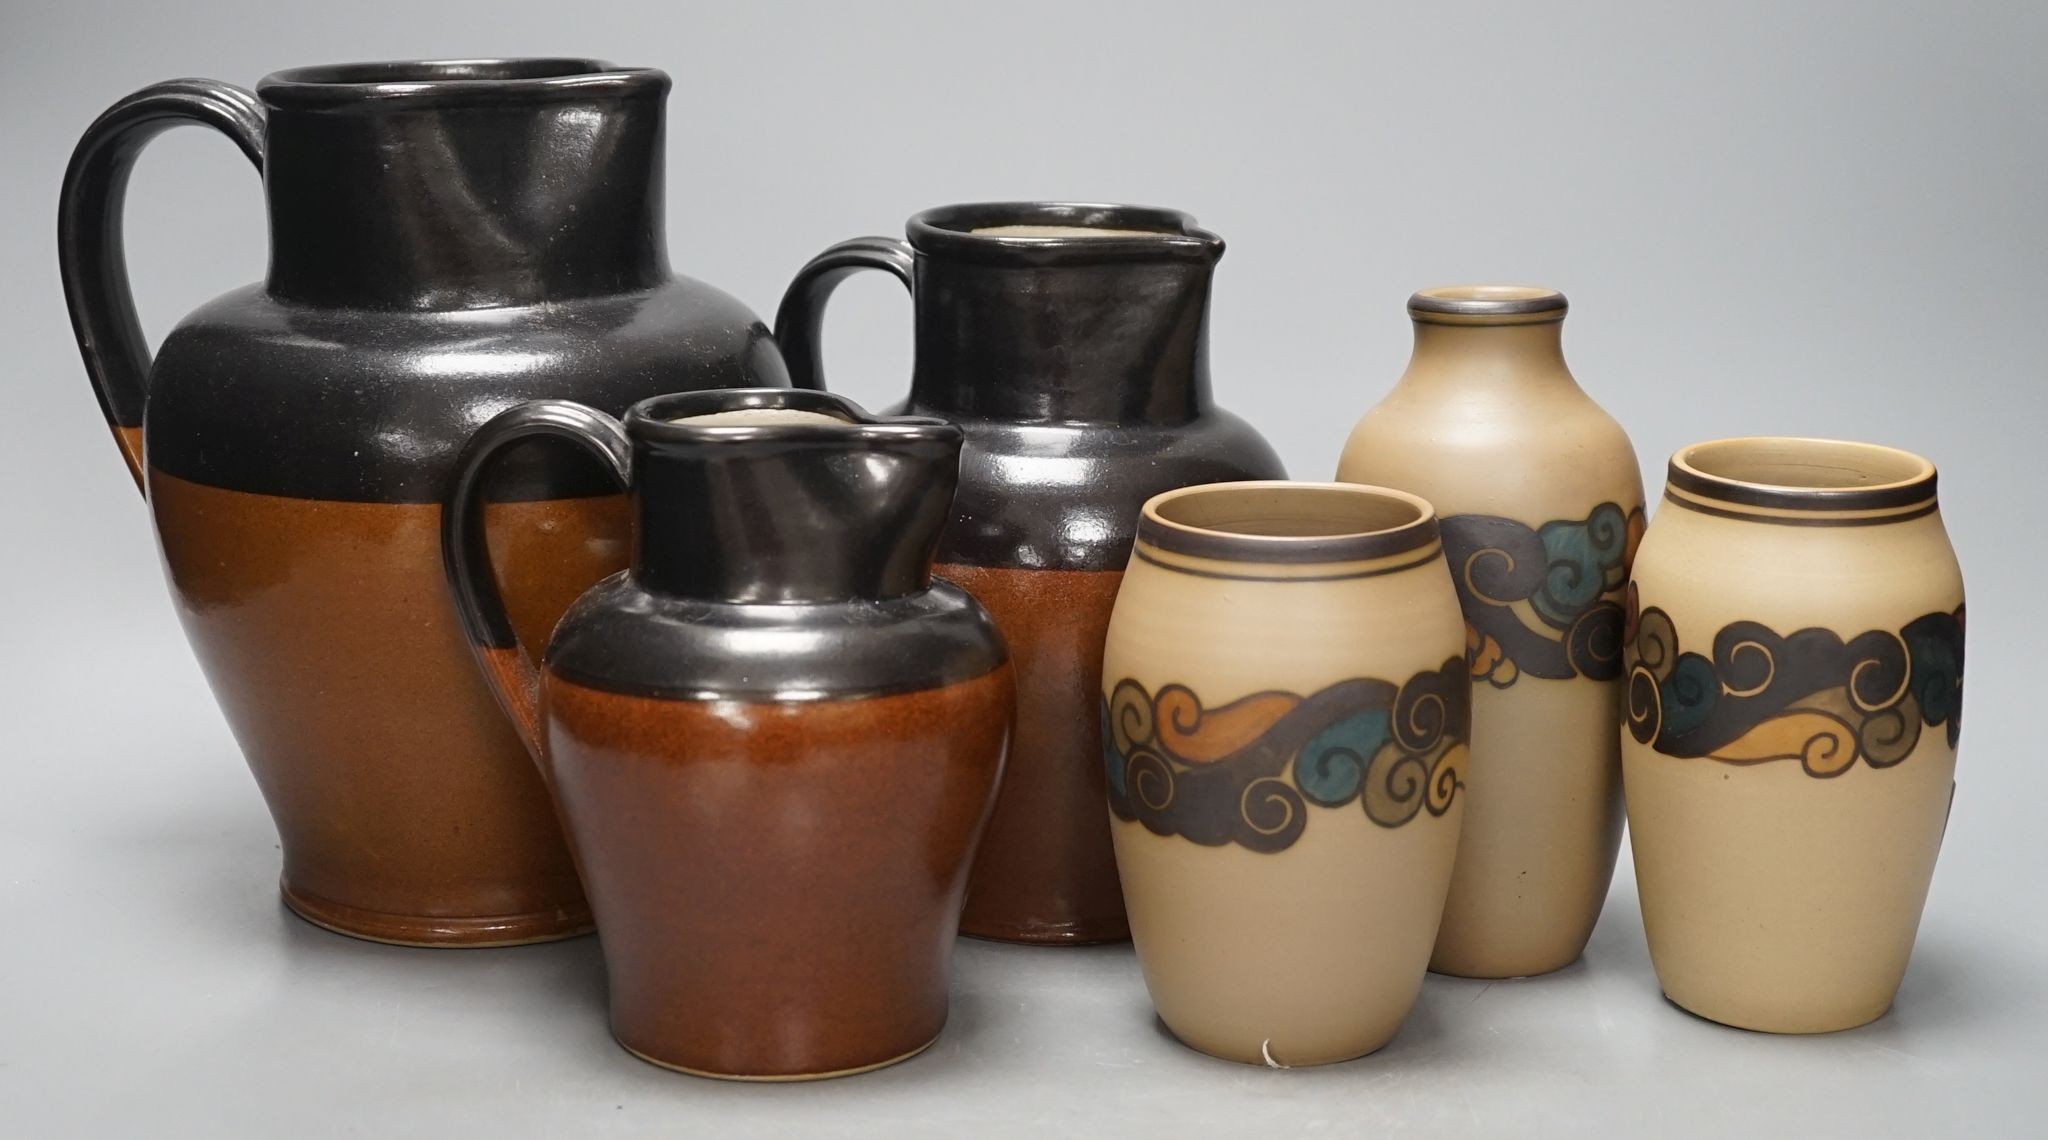 A graduated set of three Bourne Denby stoneware jugs and three 1930's stoneware vases, by Bornholm, Denmark (6)